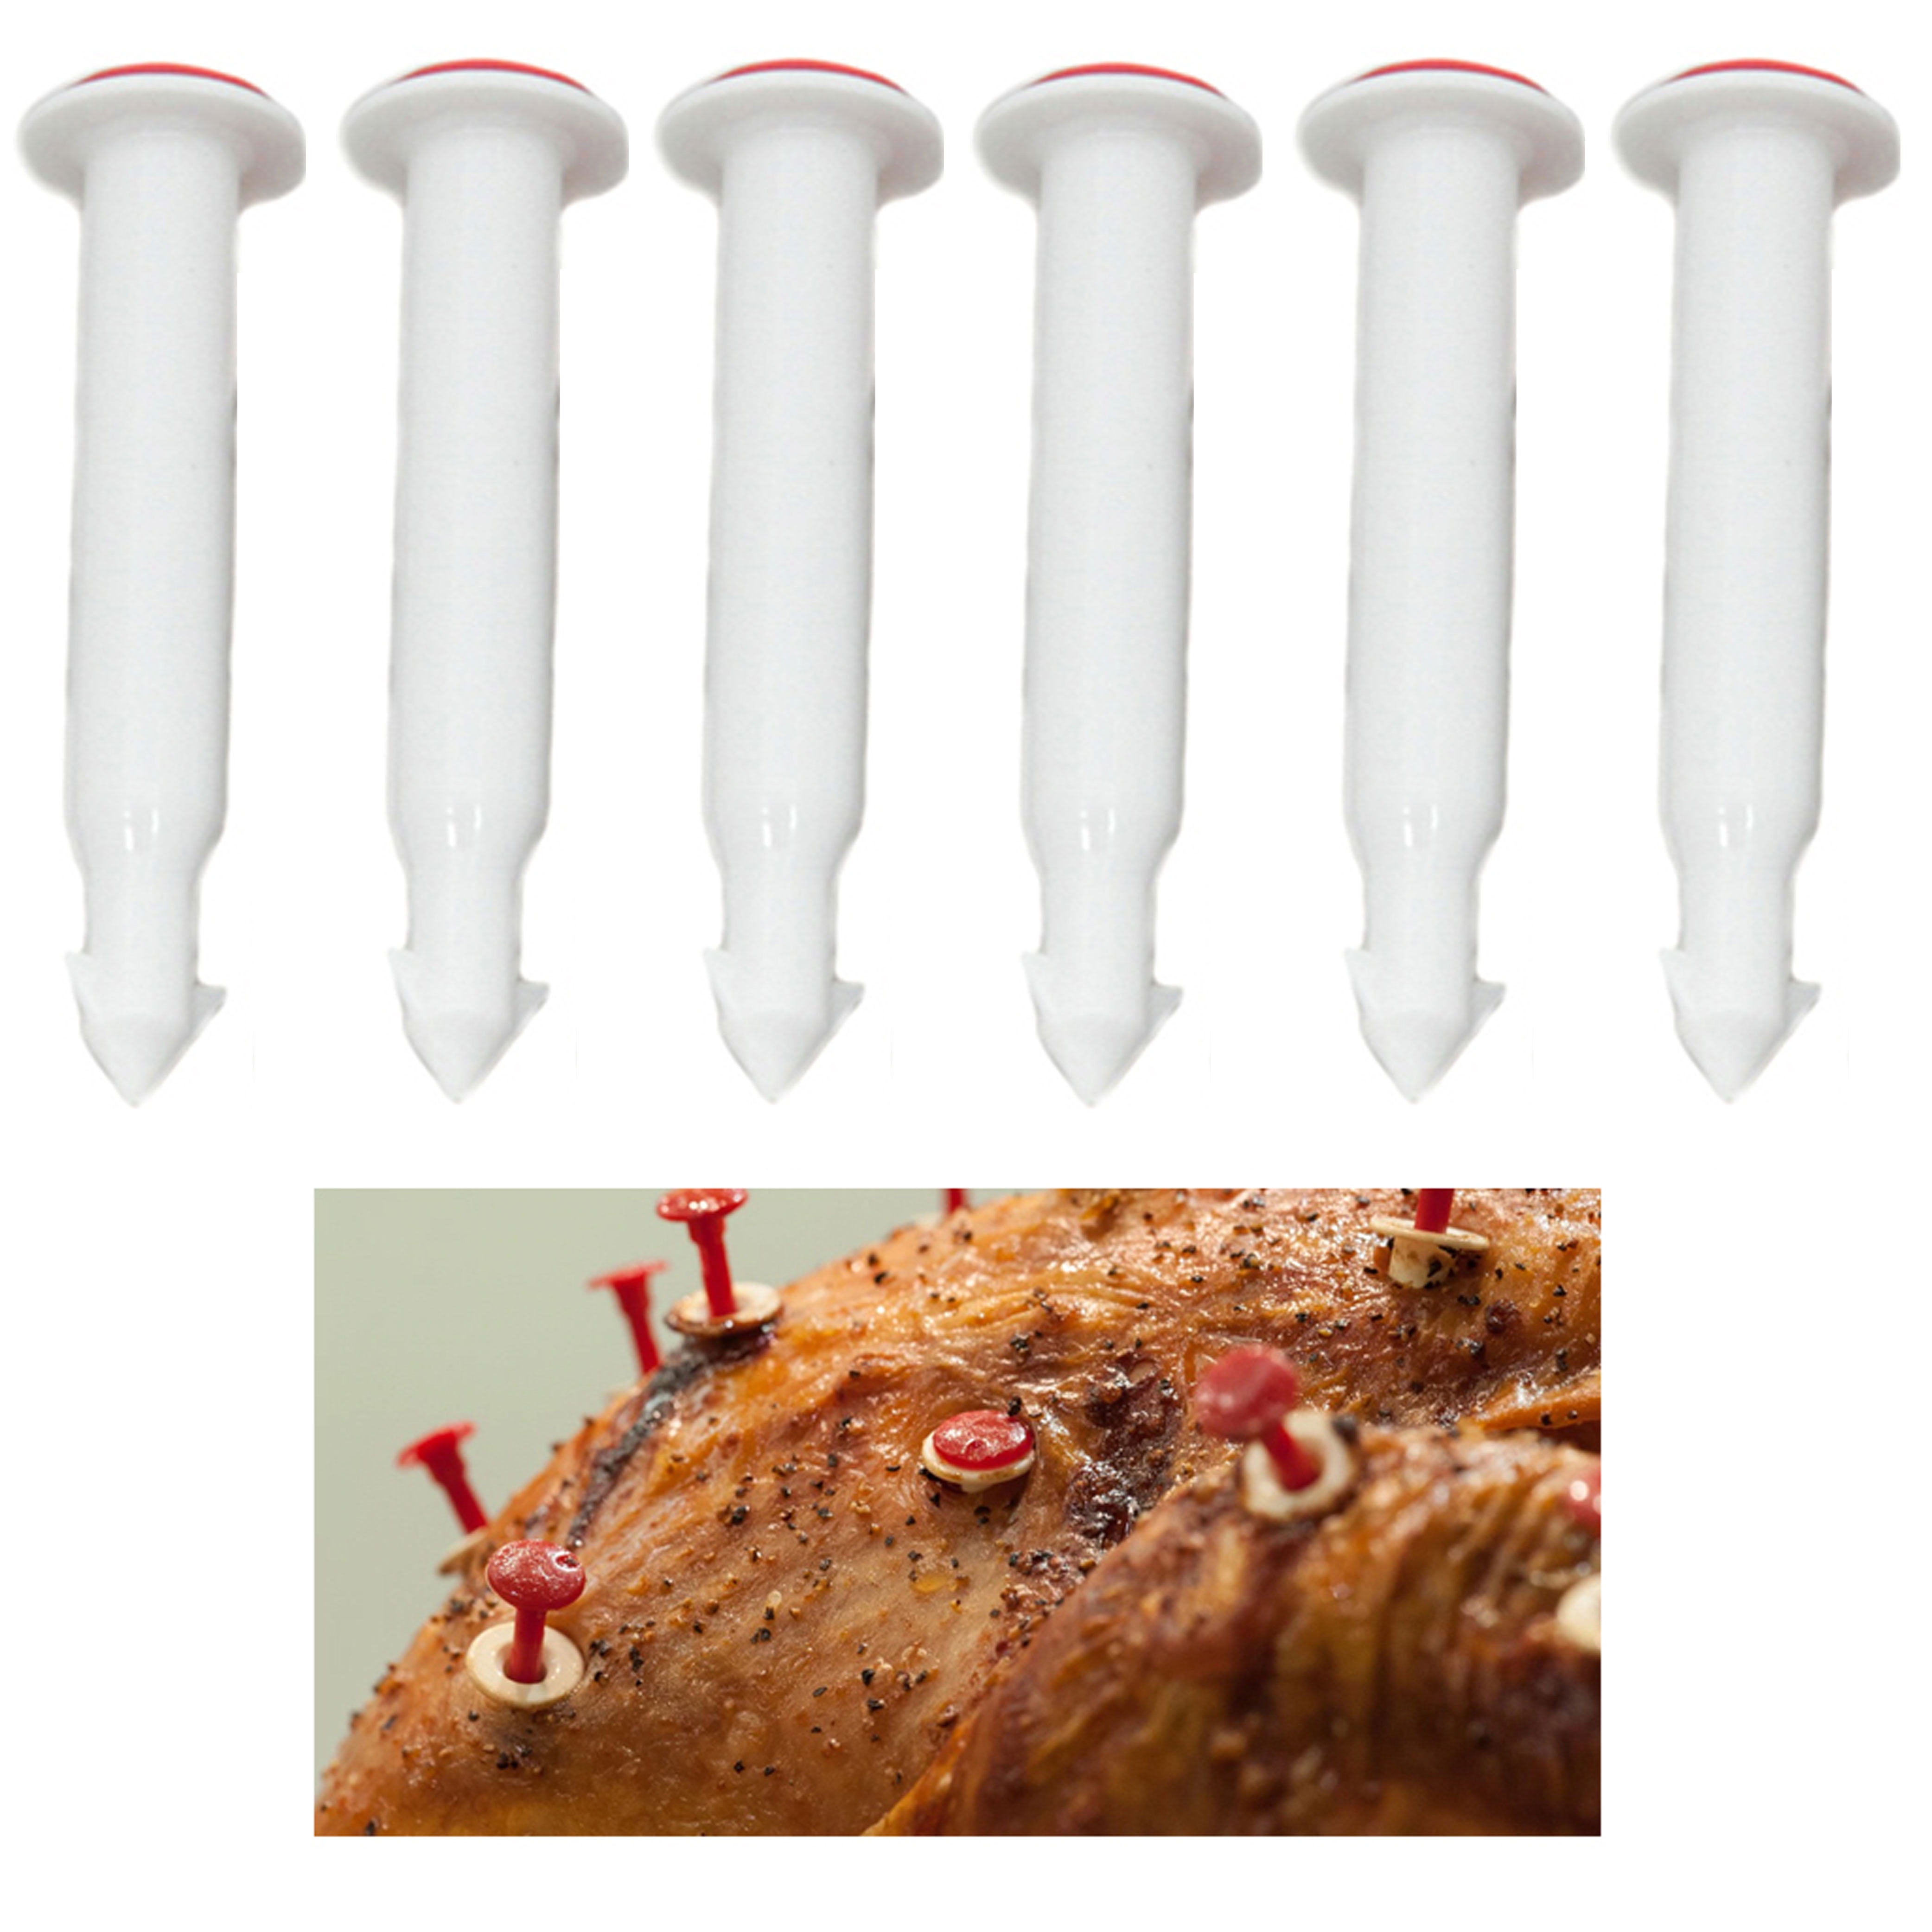  Turkey Pop Up Timer, 20Pcs Poultry Thermometer Pop Up Cooking  Thermometer Roasted Chicken Temperature Meter for Oven Cooking Poultry  Turkey Chicken Meat Beef : Home & Kitchen